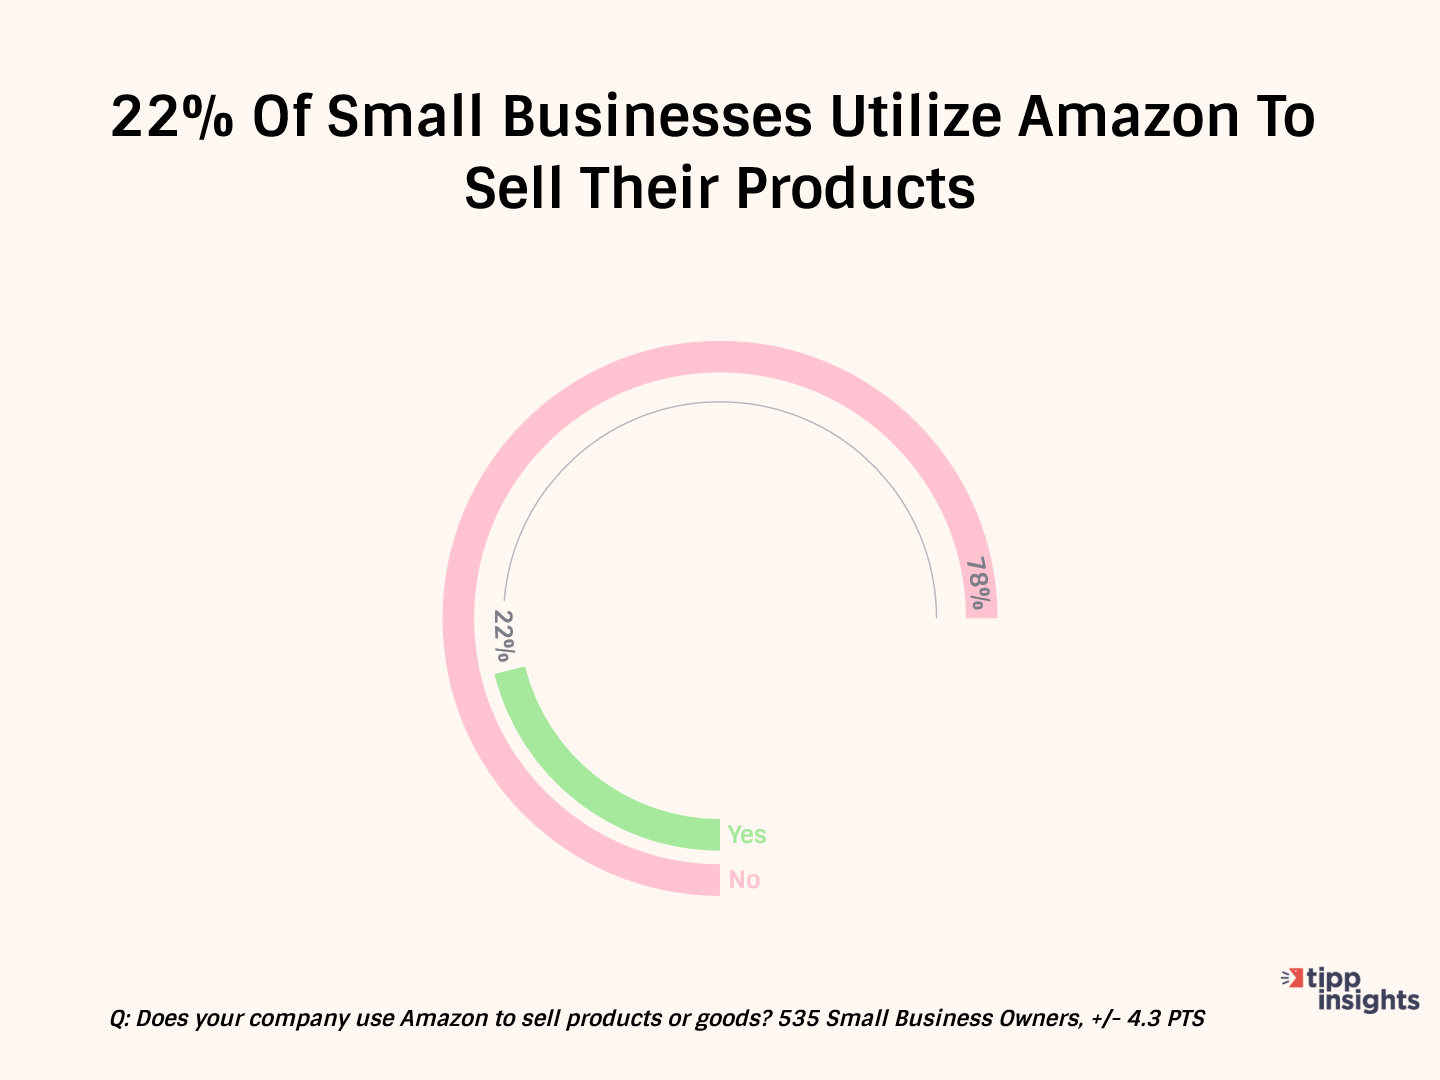 Potential Amazon Breakup Will Harm Many Small Businesses